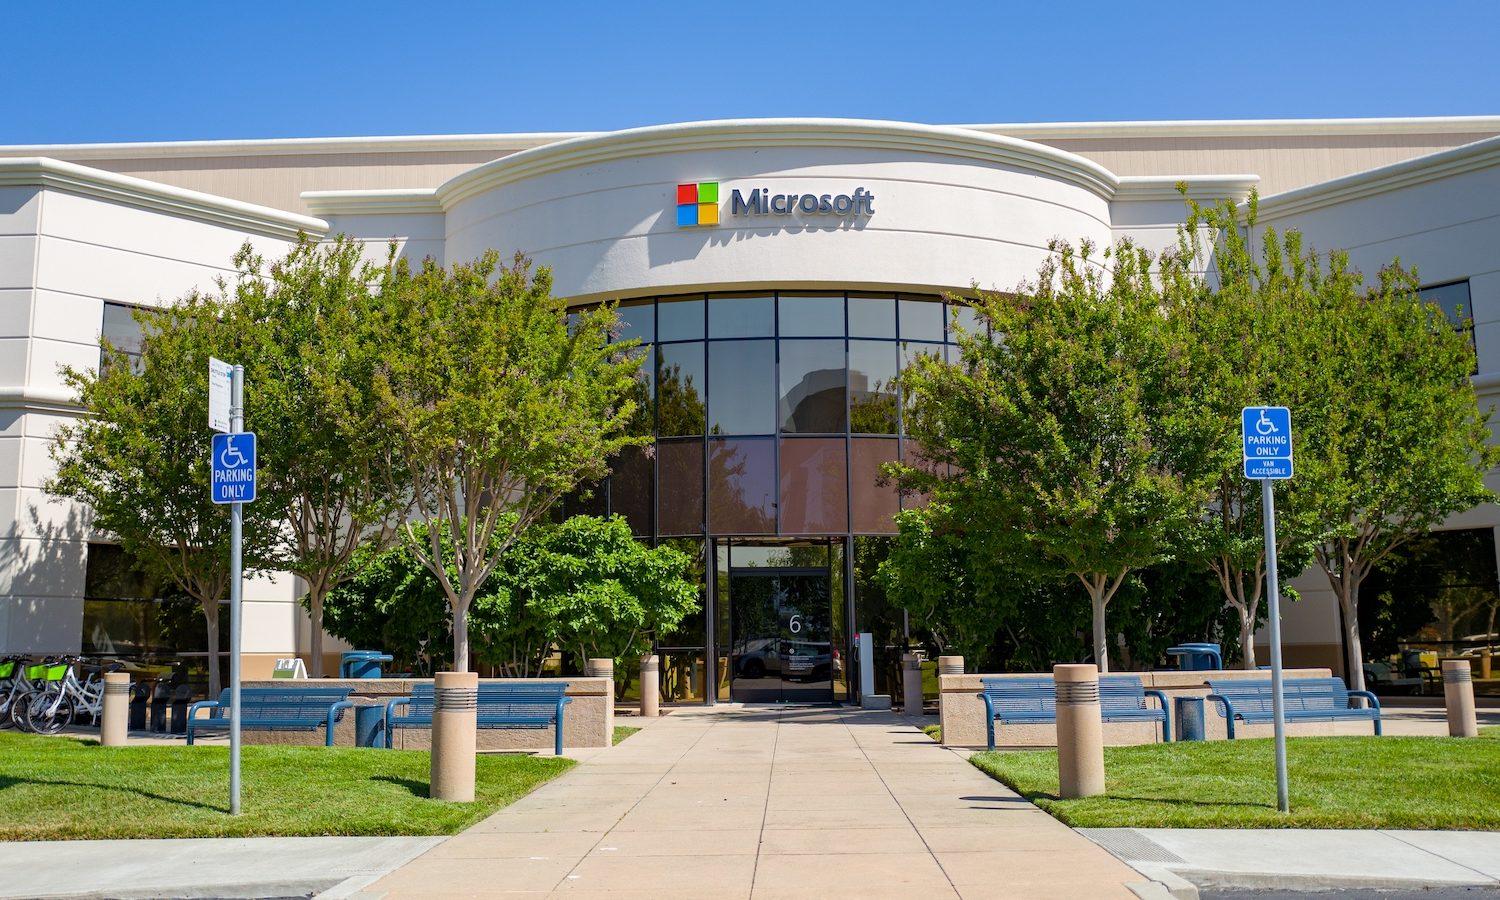 Facade with sign and logo at regional headquarters of computing company Microsoft in the Silicon Valley, Mountain View, California, May 3, 2019. Researchers have developed a proof of concept exploit for (Photo a critical flaw patched by the company last month. by Smith Collection/Gado/Getty Images)